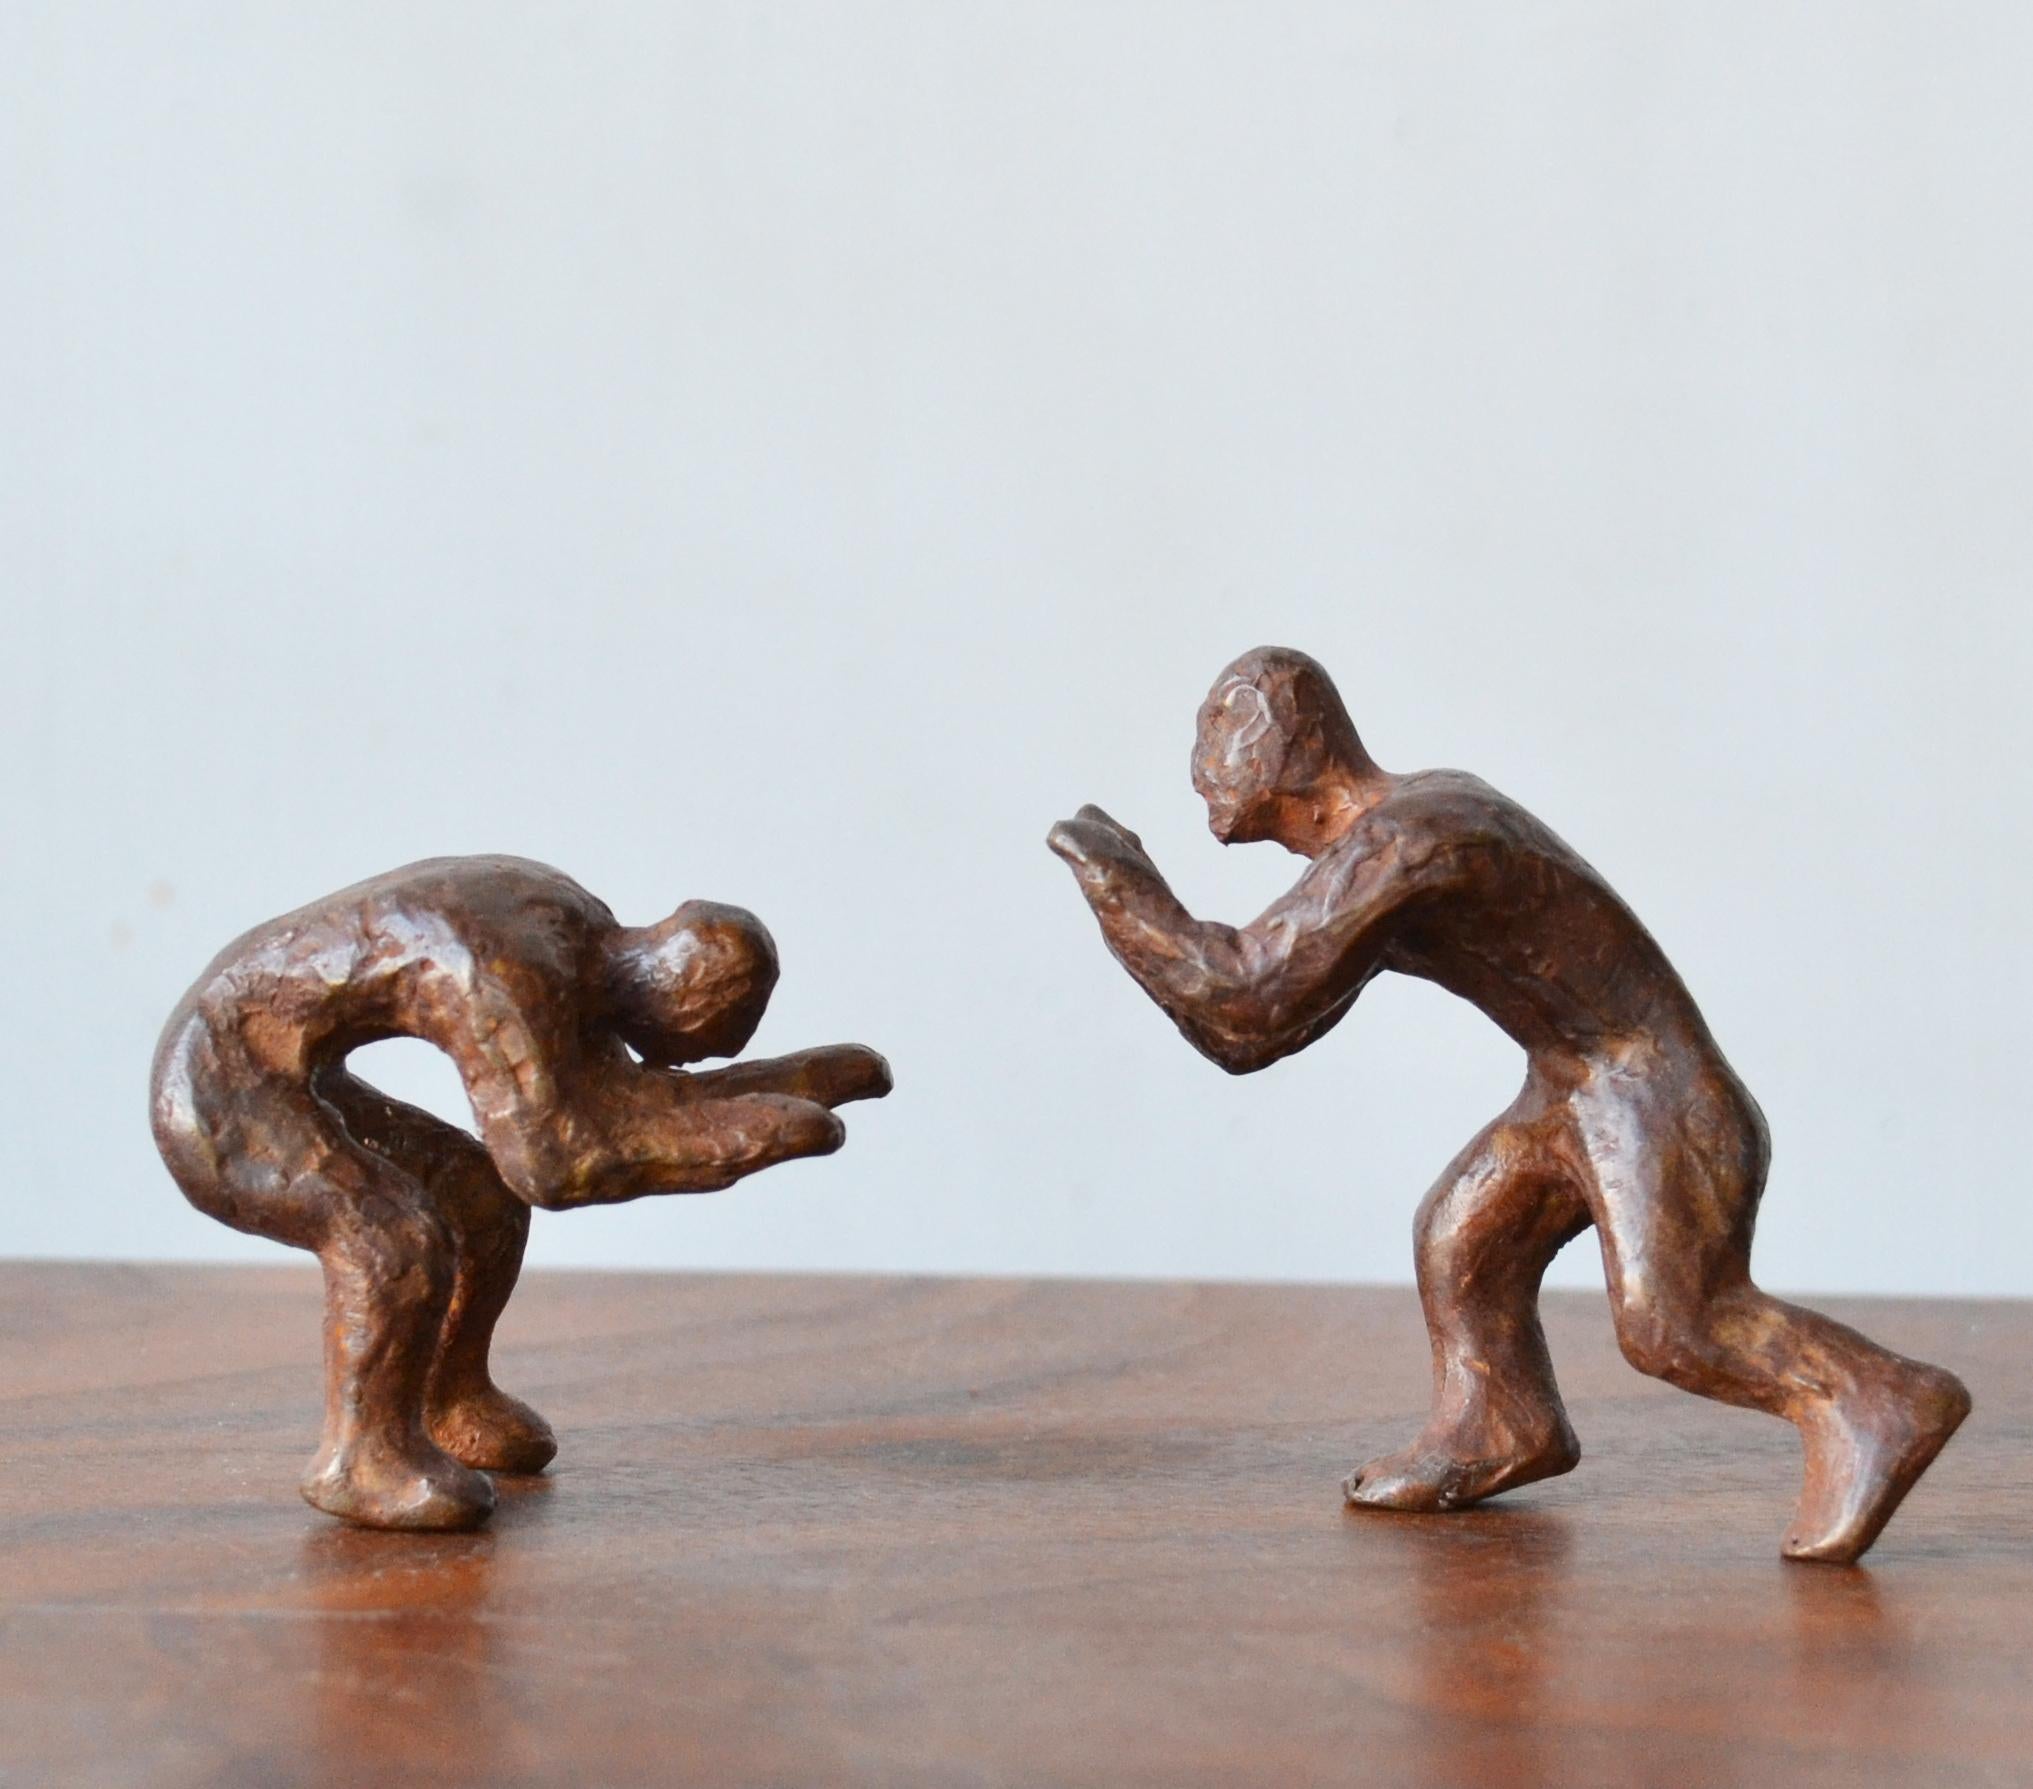 Why Fight When You Can Play? -4 Pairs playful interactive bronze figures  - Contemporary Sculpture by Noa Bornstein